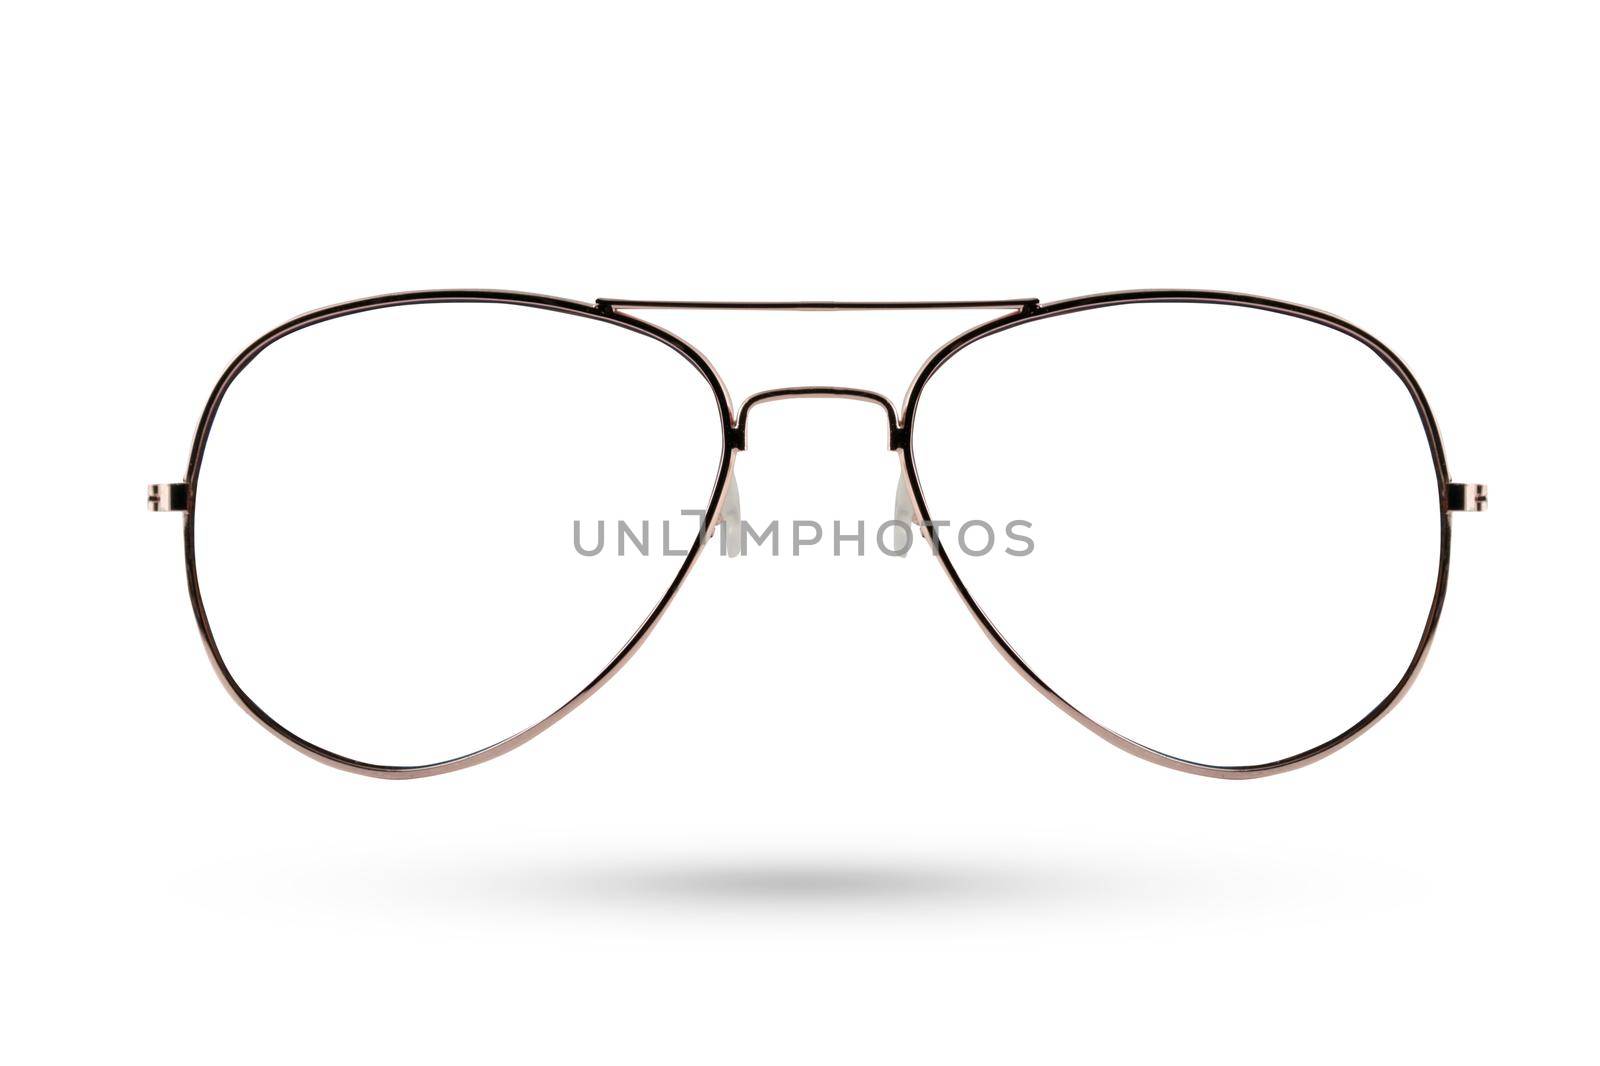 Fashion glasses style metal-framed isolated on white background.